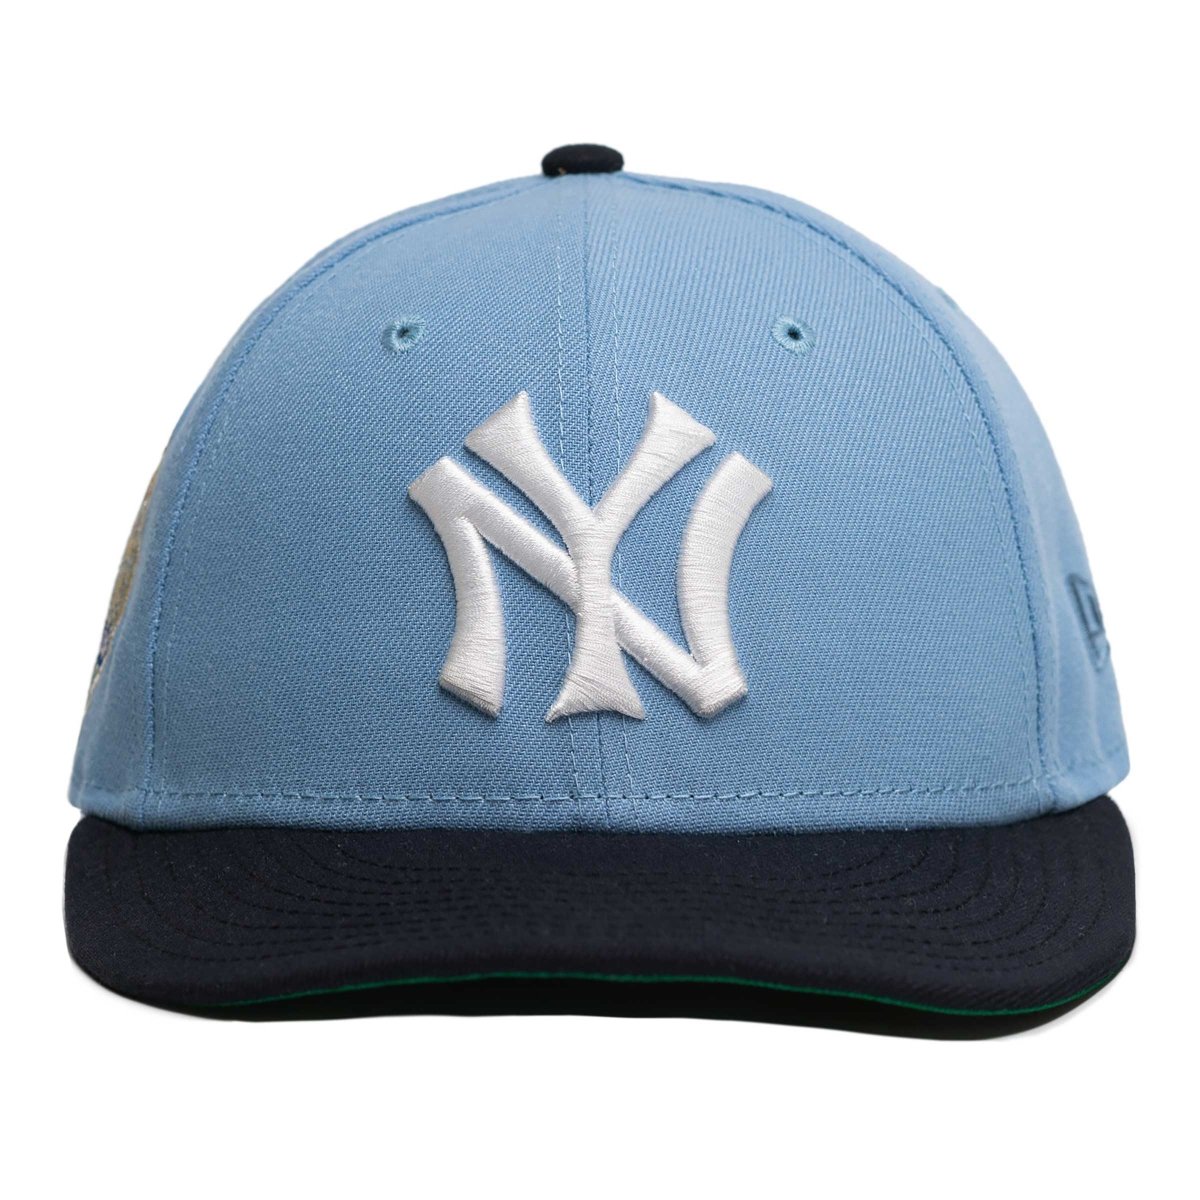 New Era x West NYC New York Yankees 1927 World Series Low Profile 59FIFTY Fitted Cap - West NYC 7 3/4 / Blue